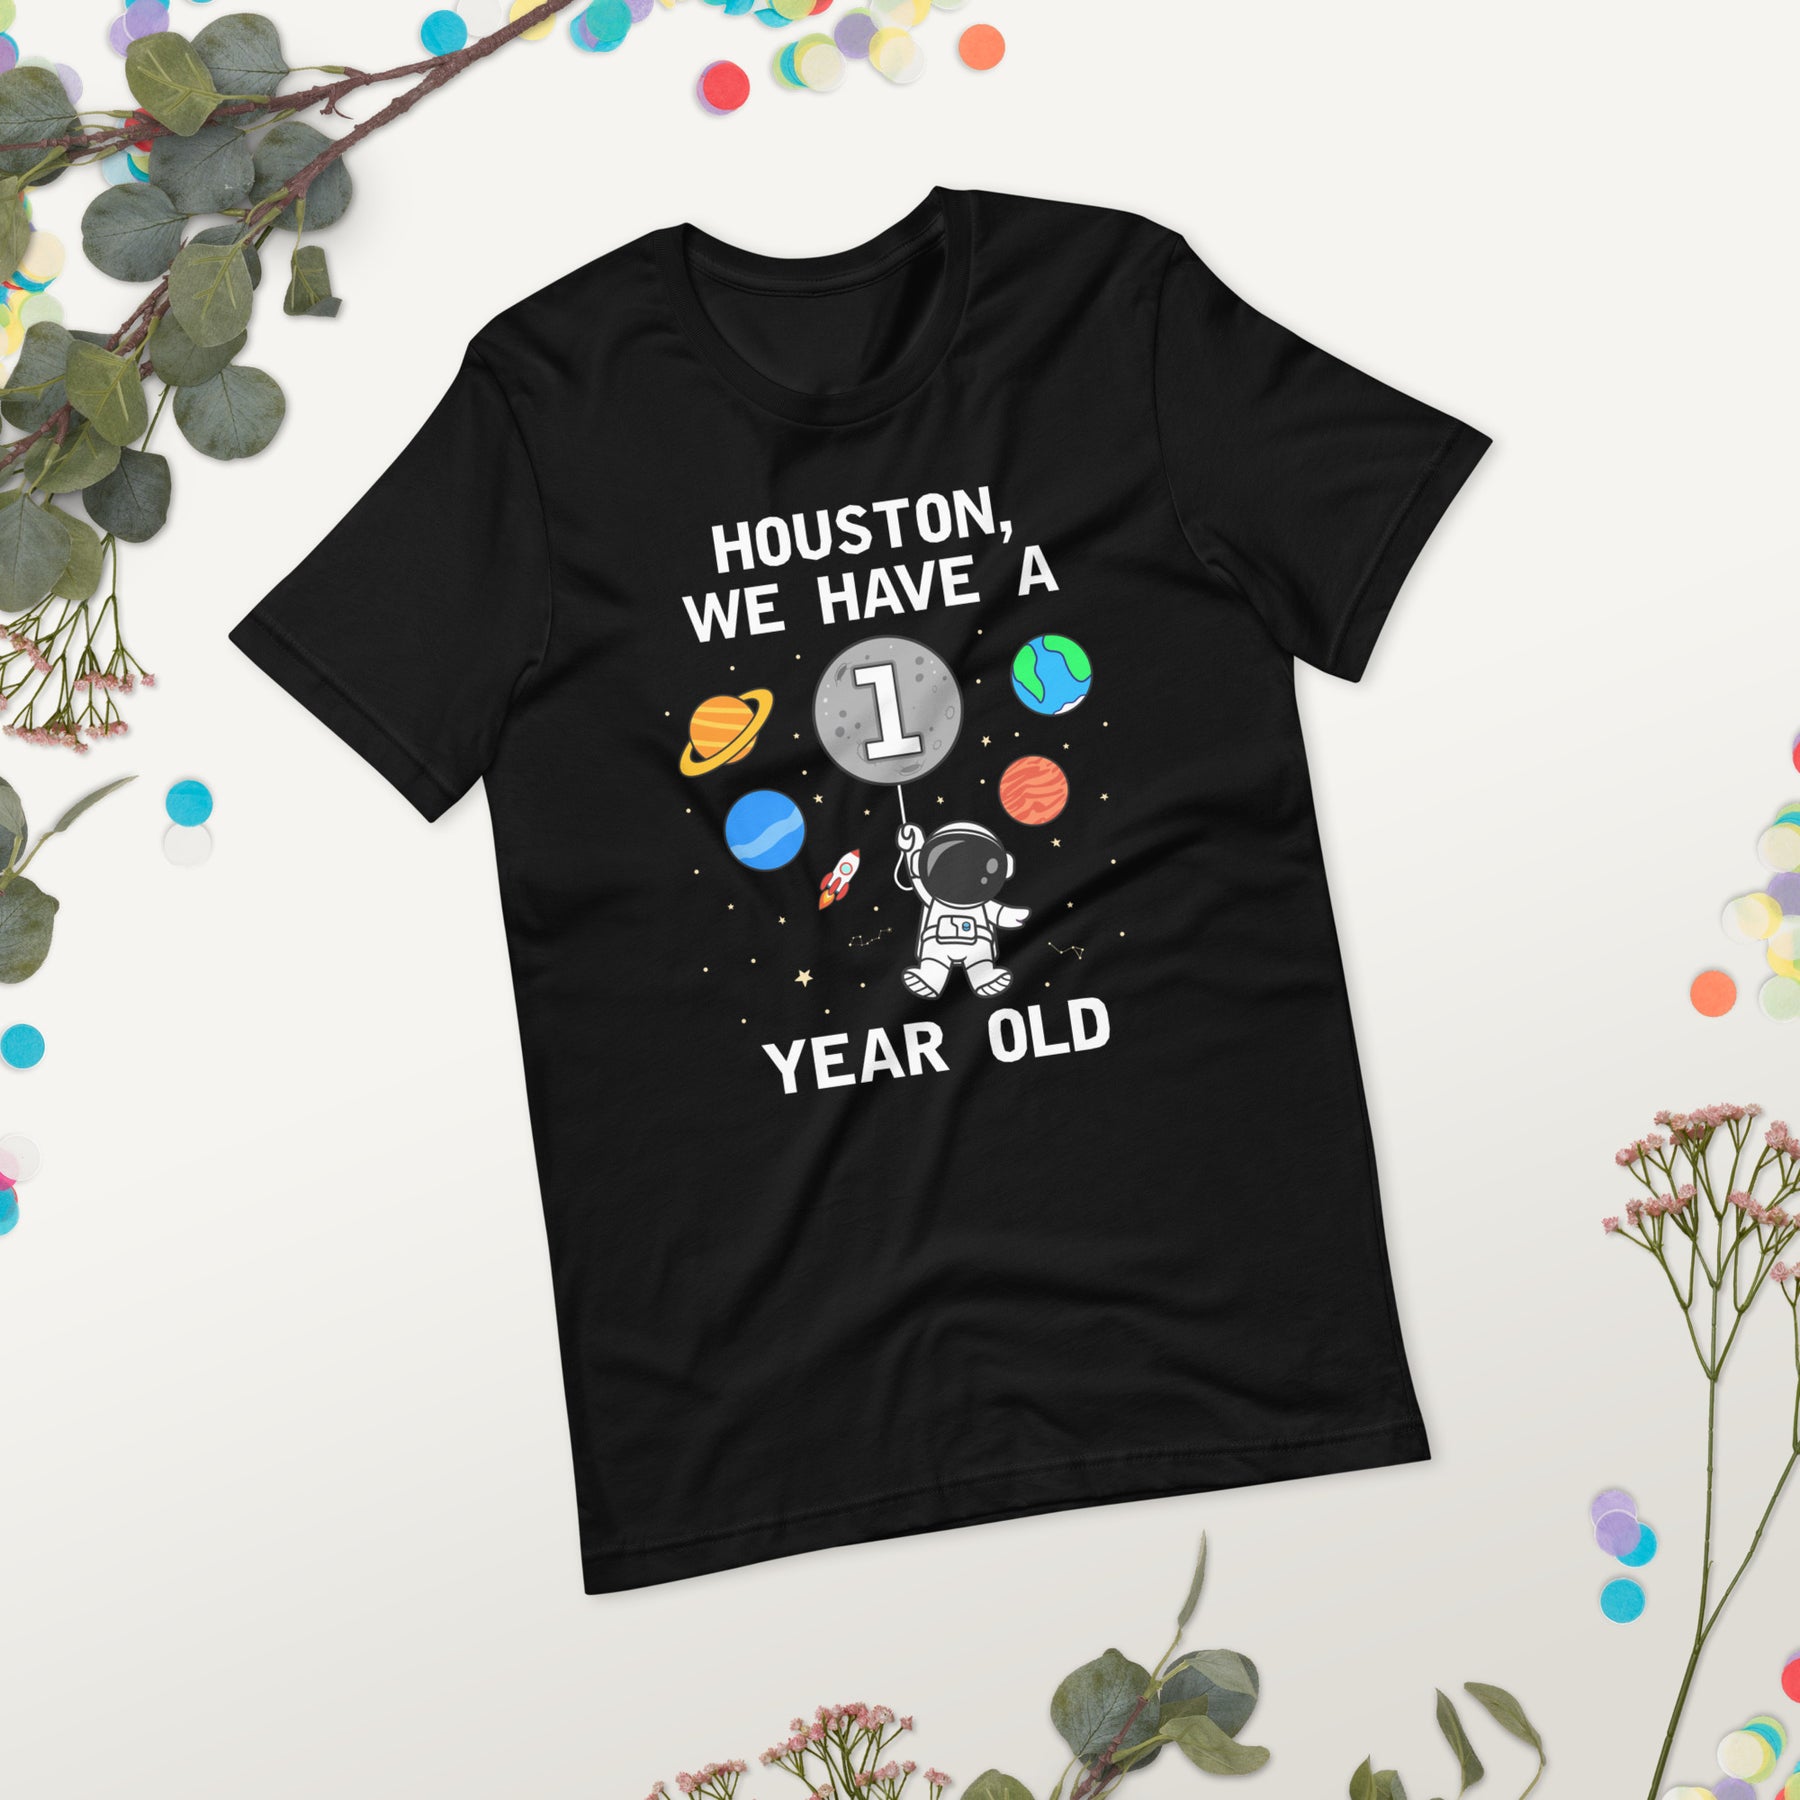 Houston, We Have a One-Year-Old - Space 1st Birthday Shirt